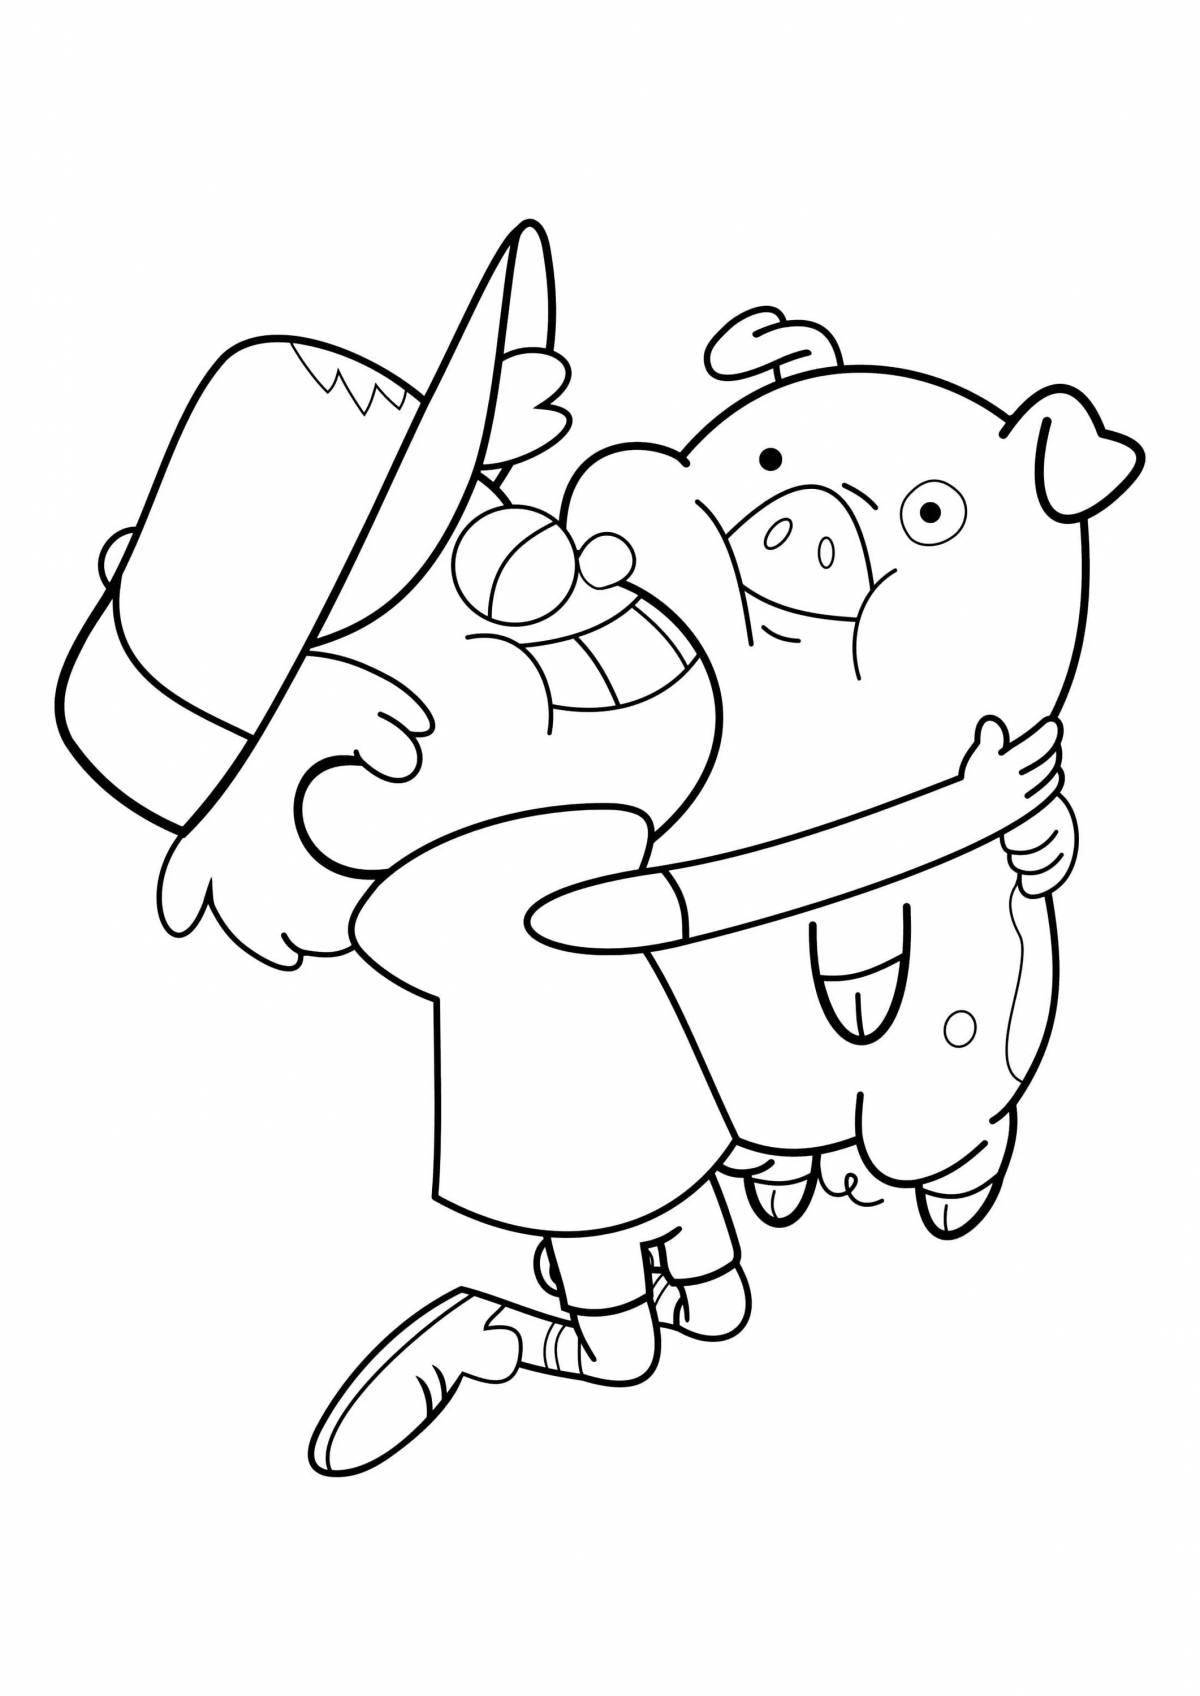 Gravity falls piggy animated coloring page